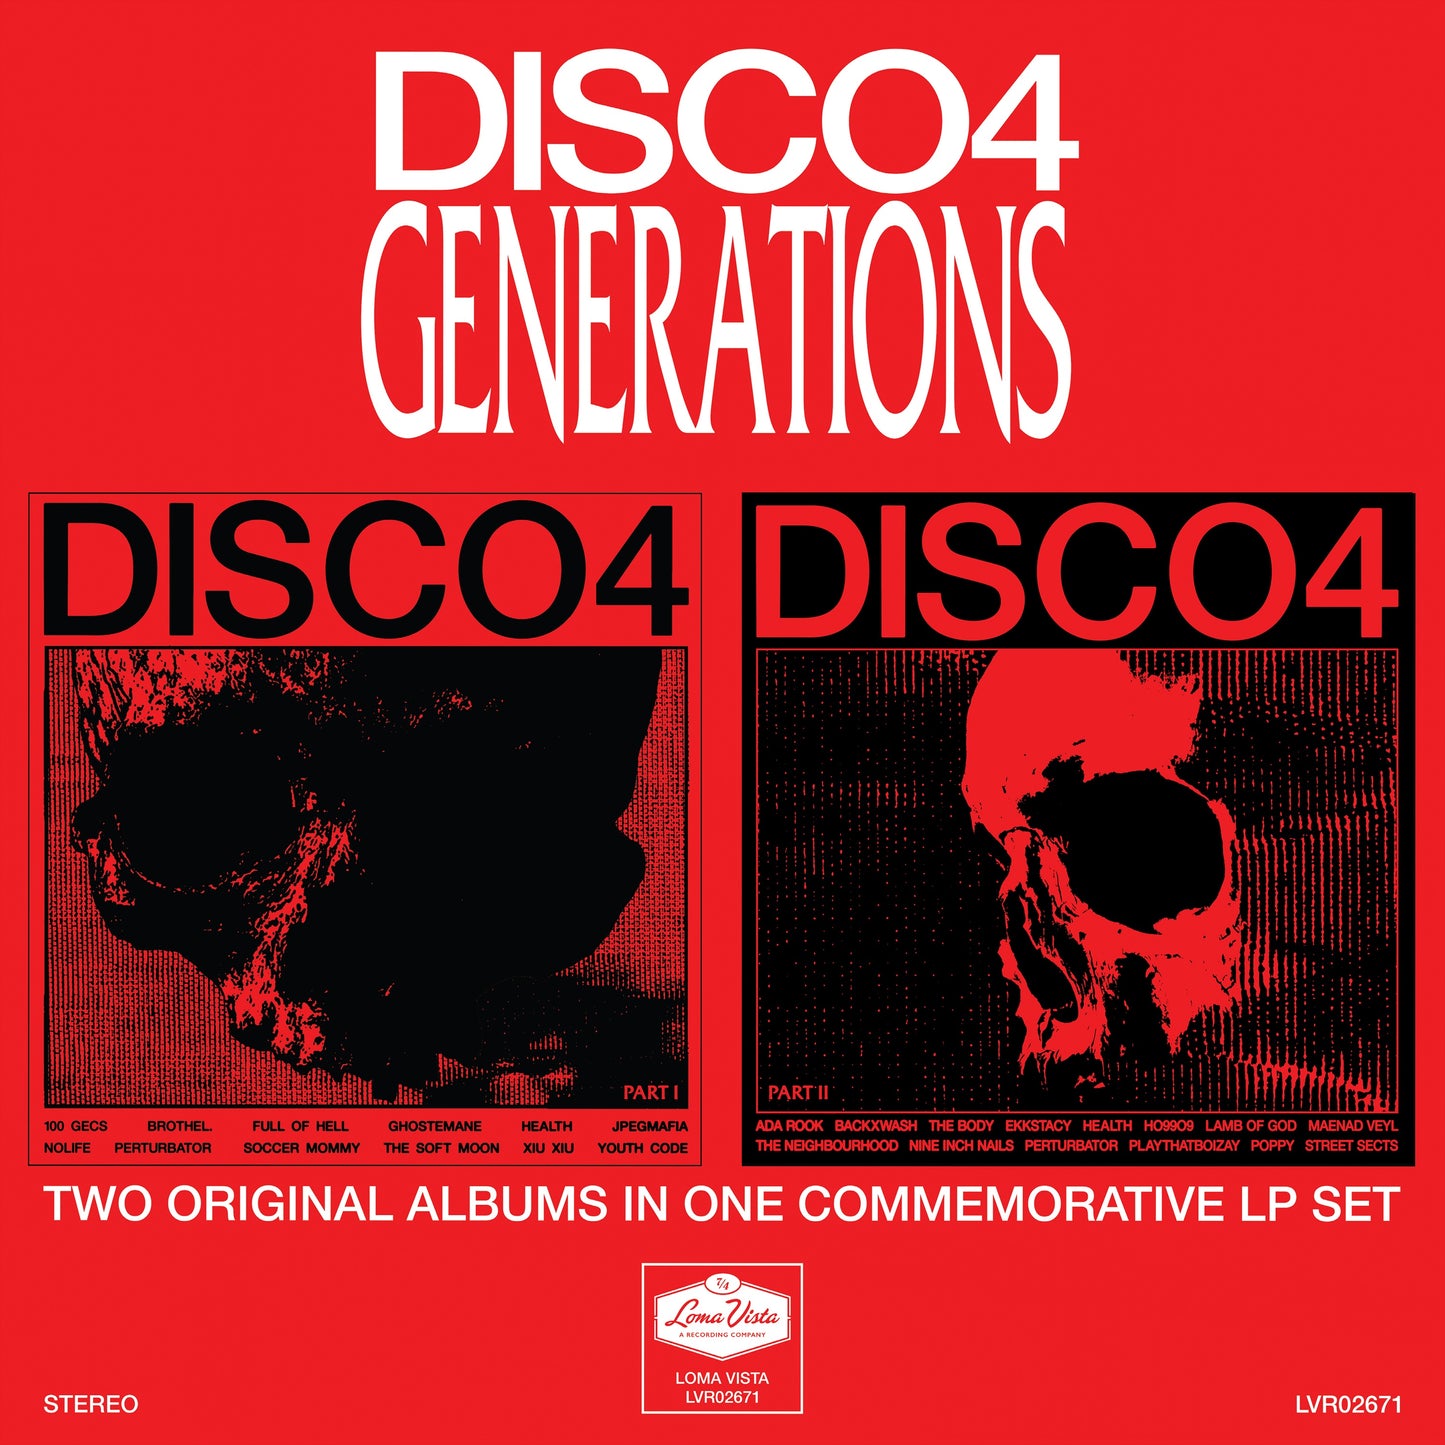 Health - Disco 4 Generations (Out 31/5/24)